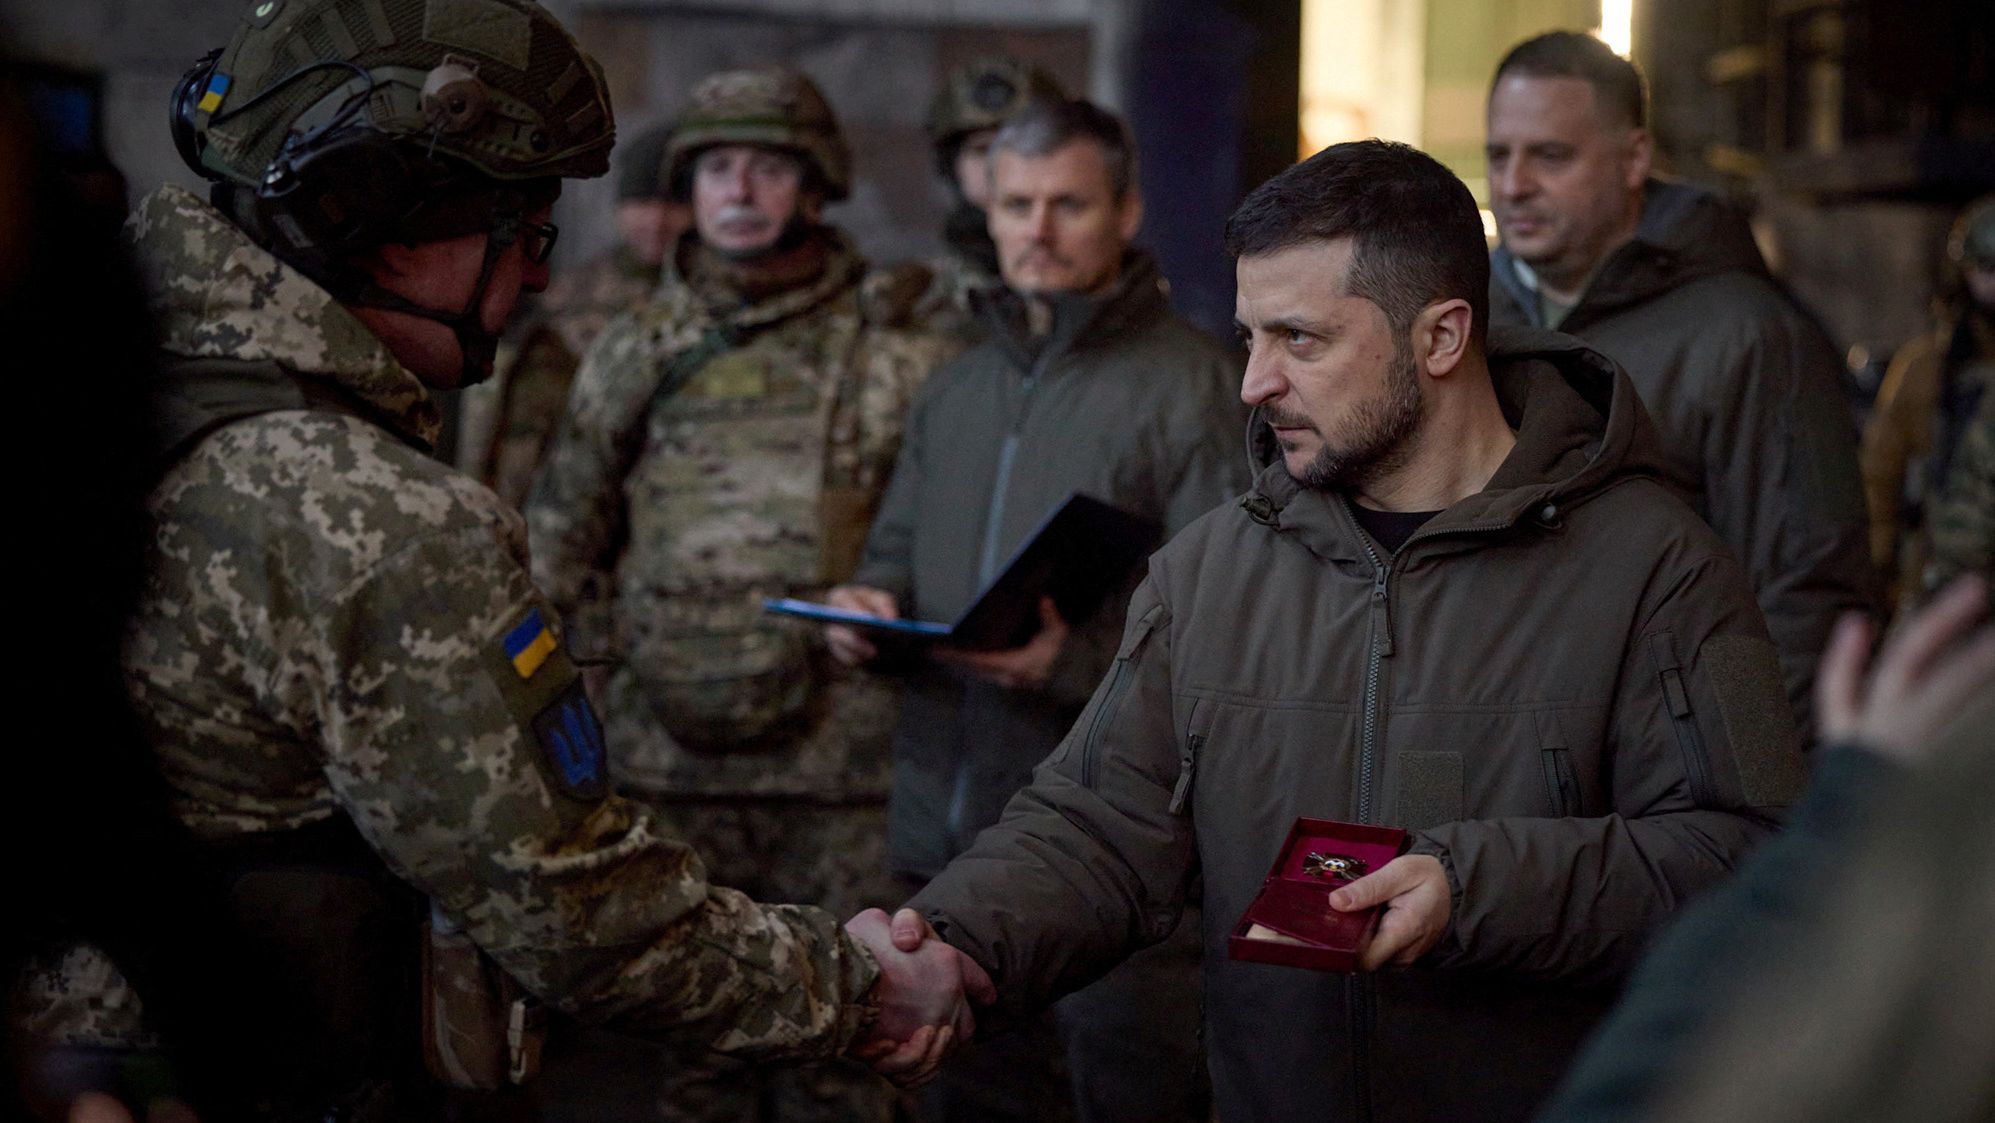 Ukraine's President Volodymyr Zelenskiy awards a Ukrainian service member at a position in the frontline town of Bakhmut, amid Russia's attack on Ukraine, in Donetsk region, Ukraine December 20, 2022. Ukrainian Presidential Press Service/Handout via REUTERS ATTENTION EDITORS - THIS IMAGE HAS BEEN SUPPLIED BY A THIRD PARTY.

